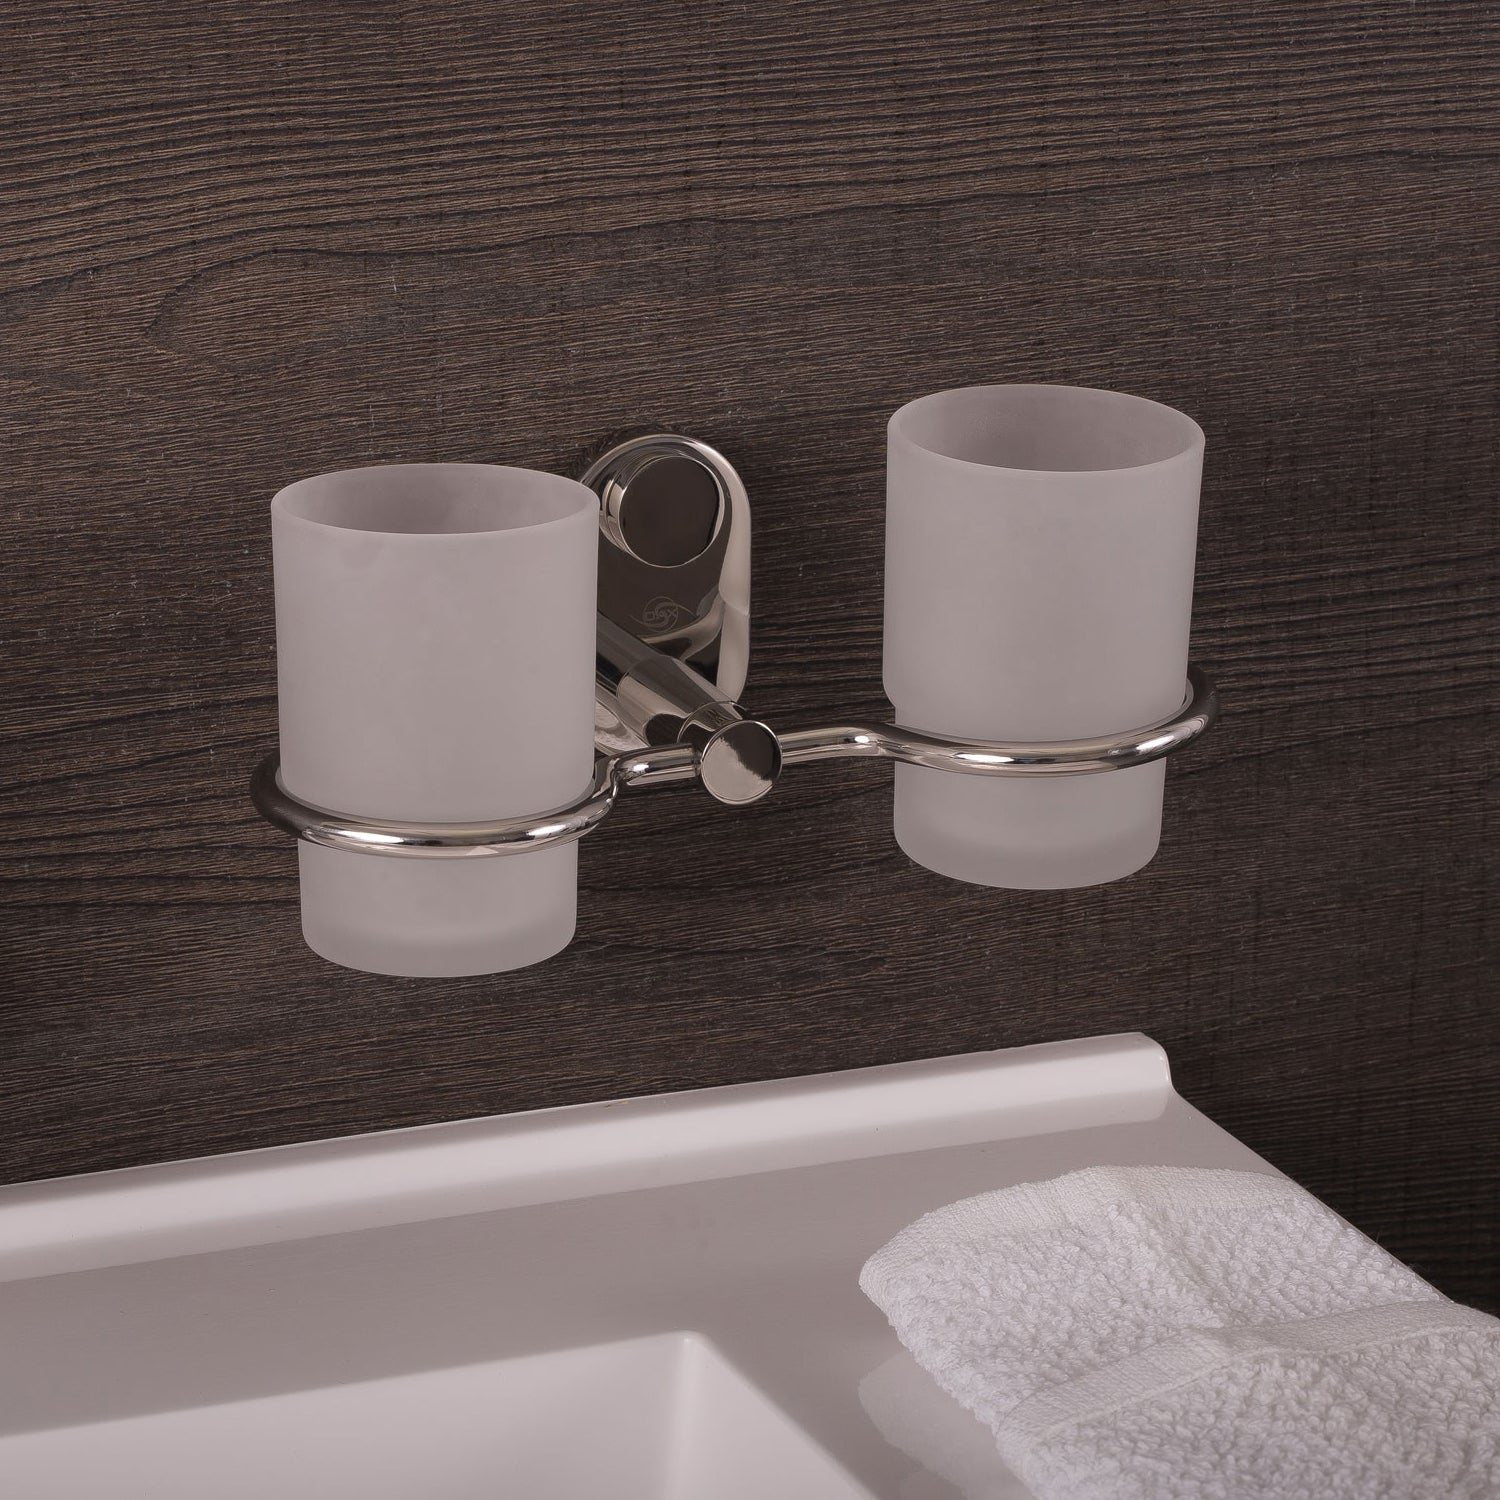 DAX Bathroom Double Tumbler Toothbrush Holder, Wall Mount Stainless Steel with Glass Cup, Polish Finish, 8-1/4 x 3-3/4 x 4-1/8 Inches (DAX-G0214-P)